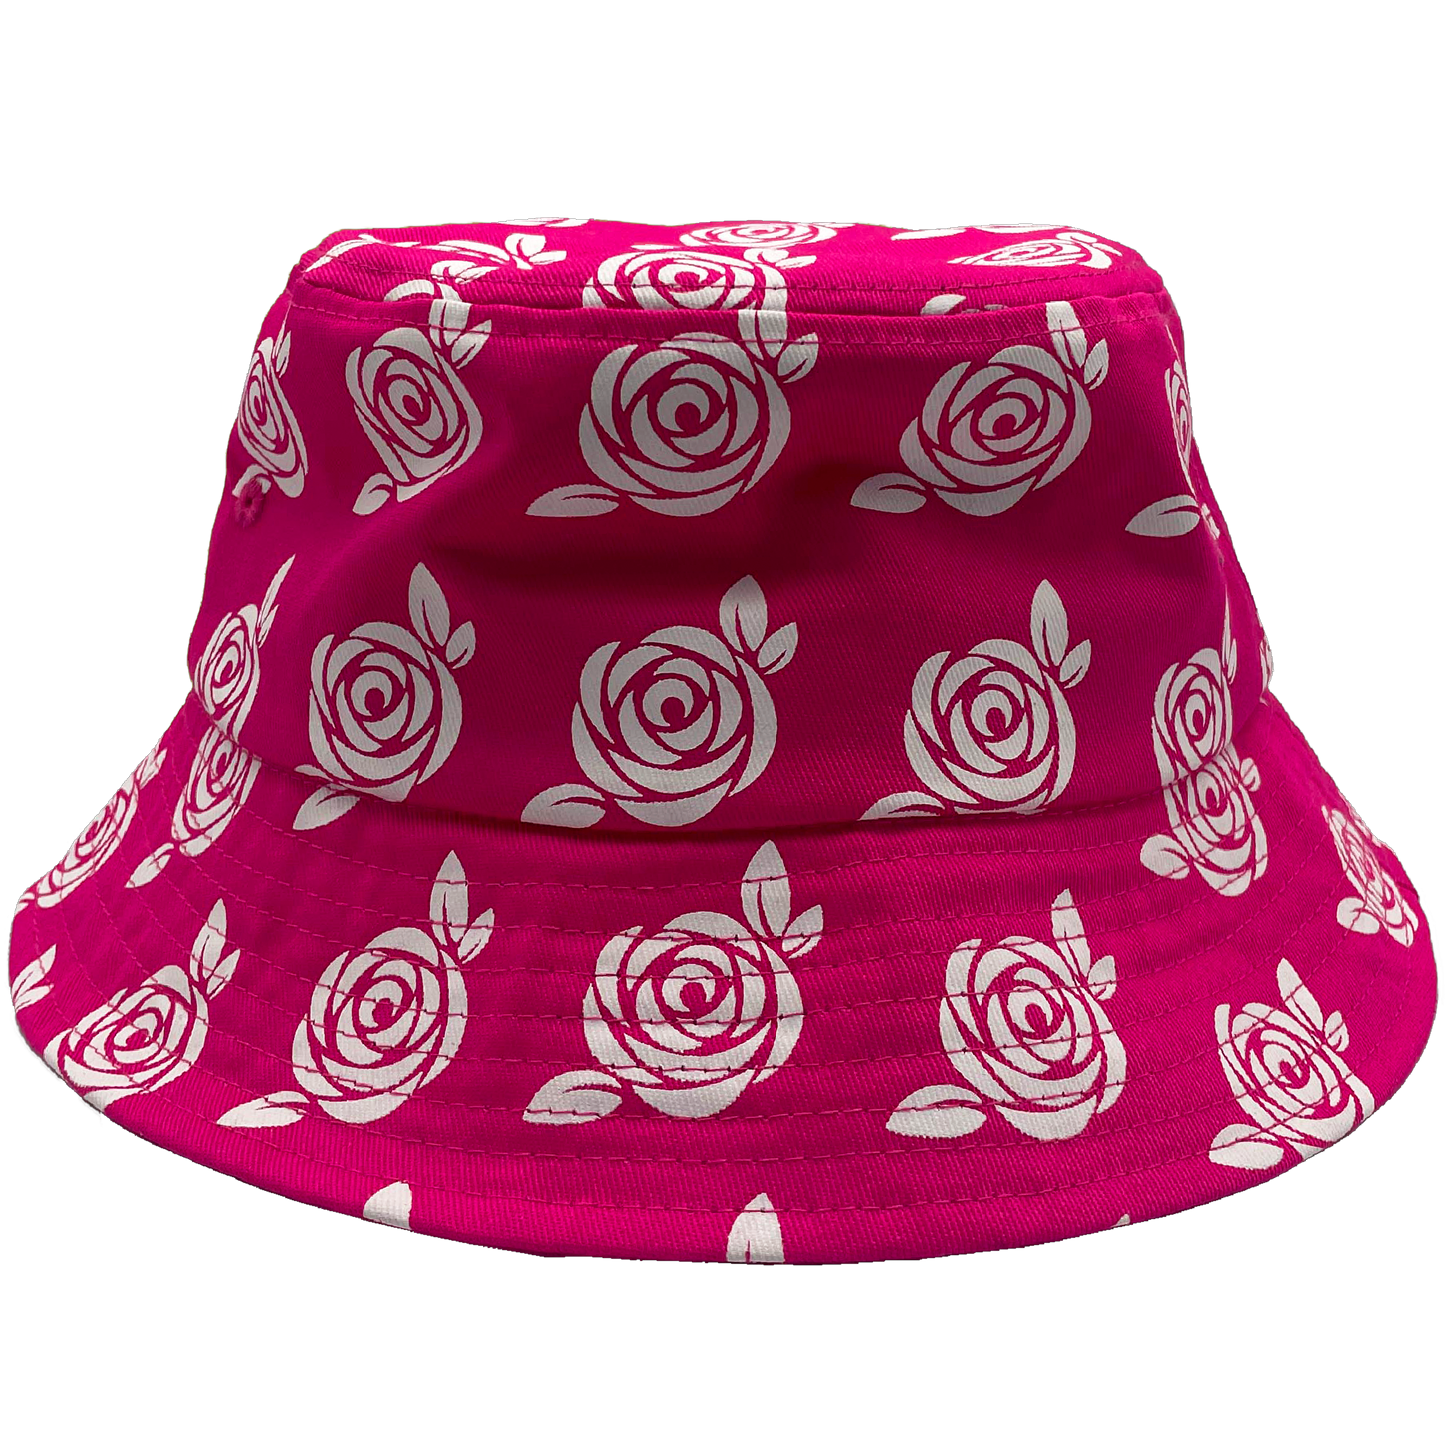 Could Be Gayer Magenta Bucket Hat